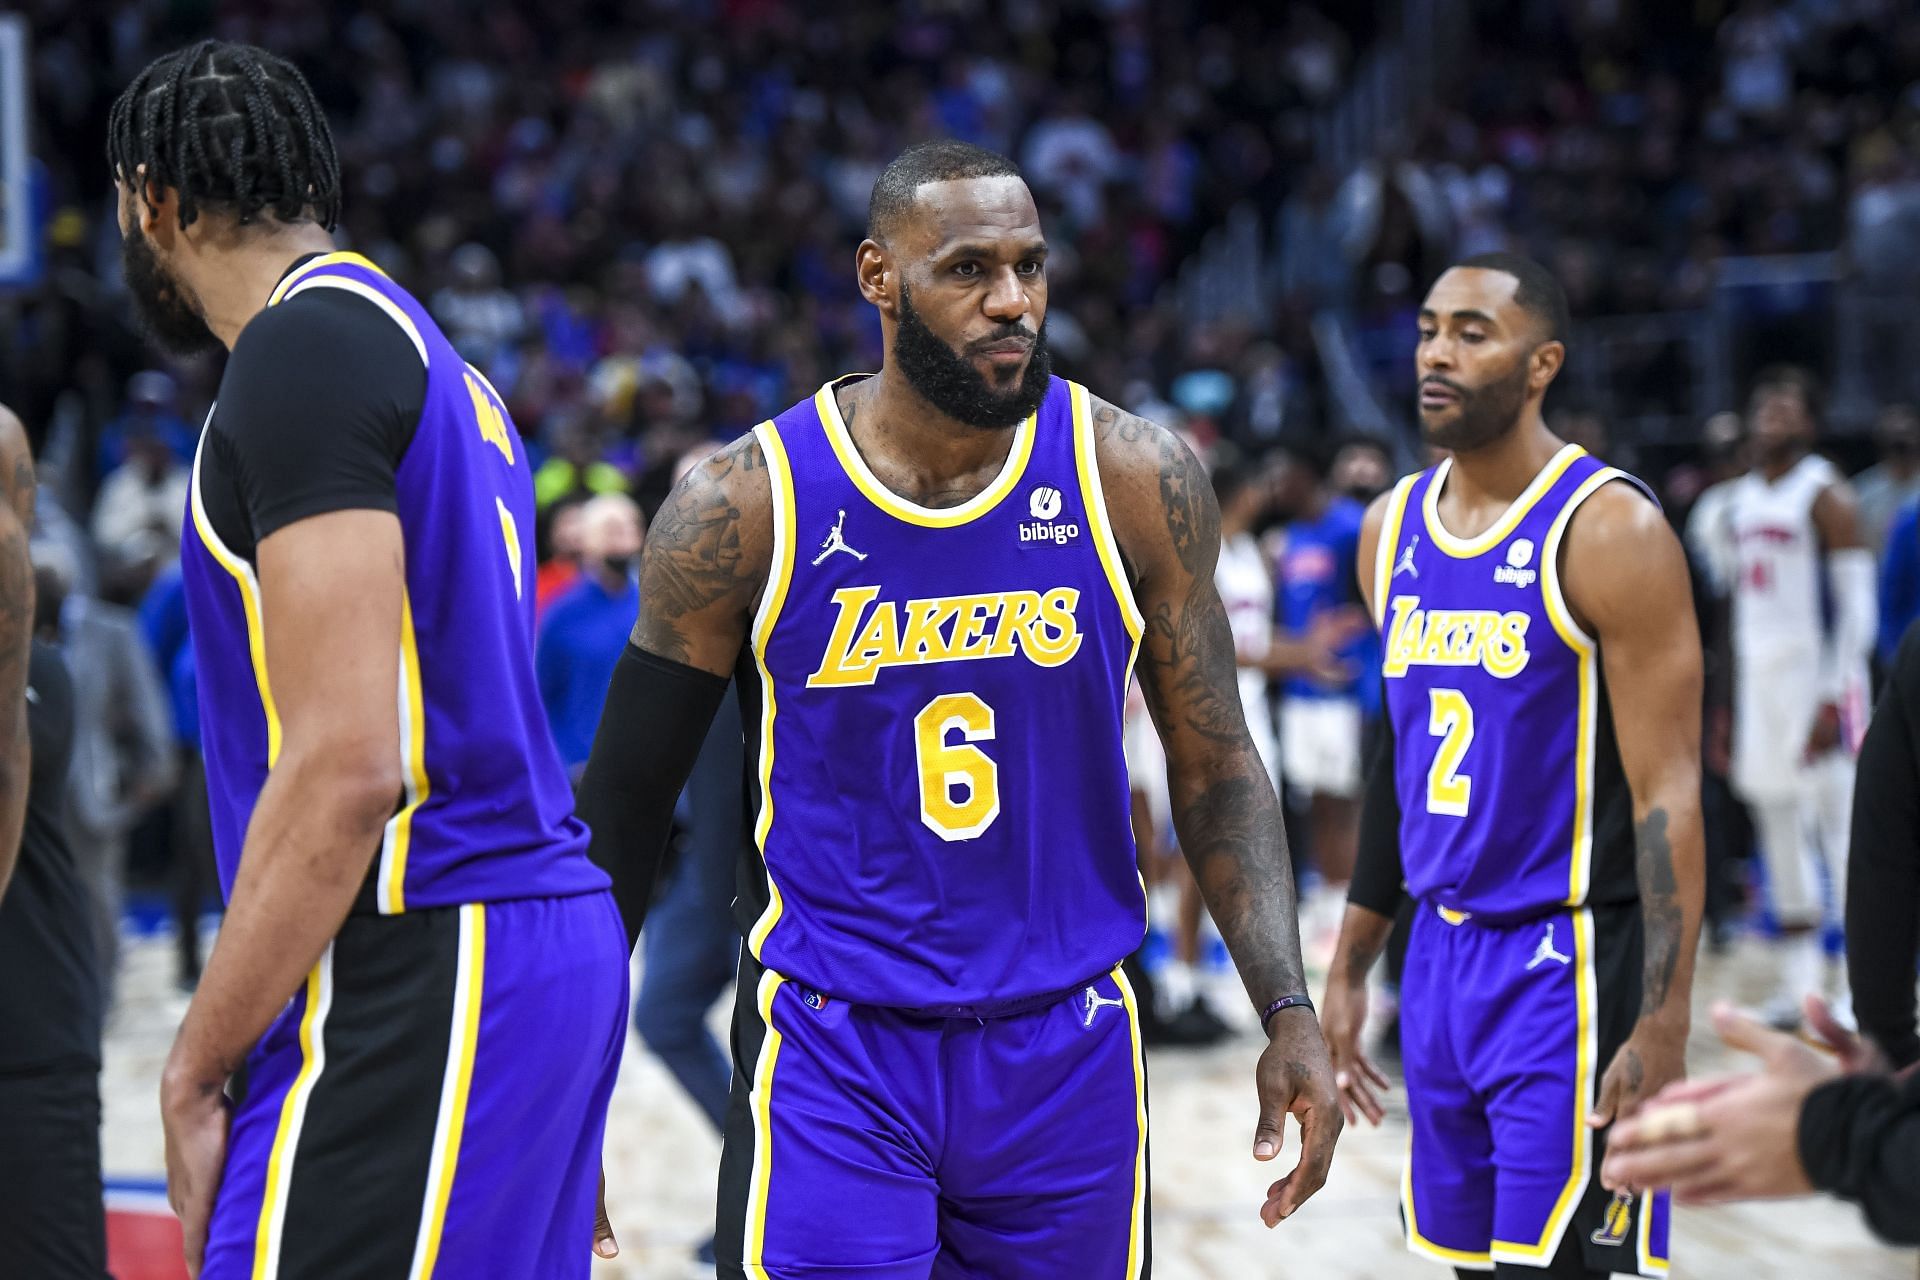 LeBron James and the LA Lakers against the Detroit Pistons